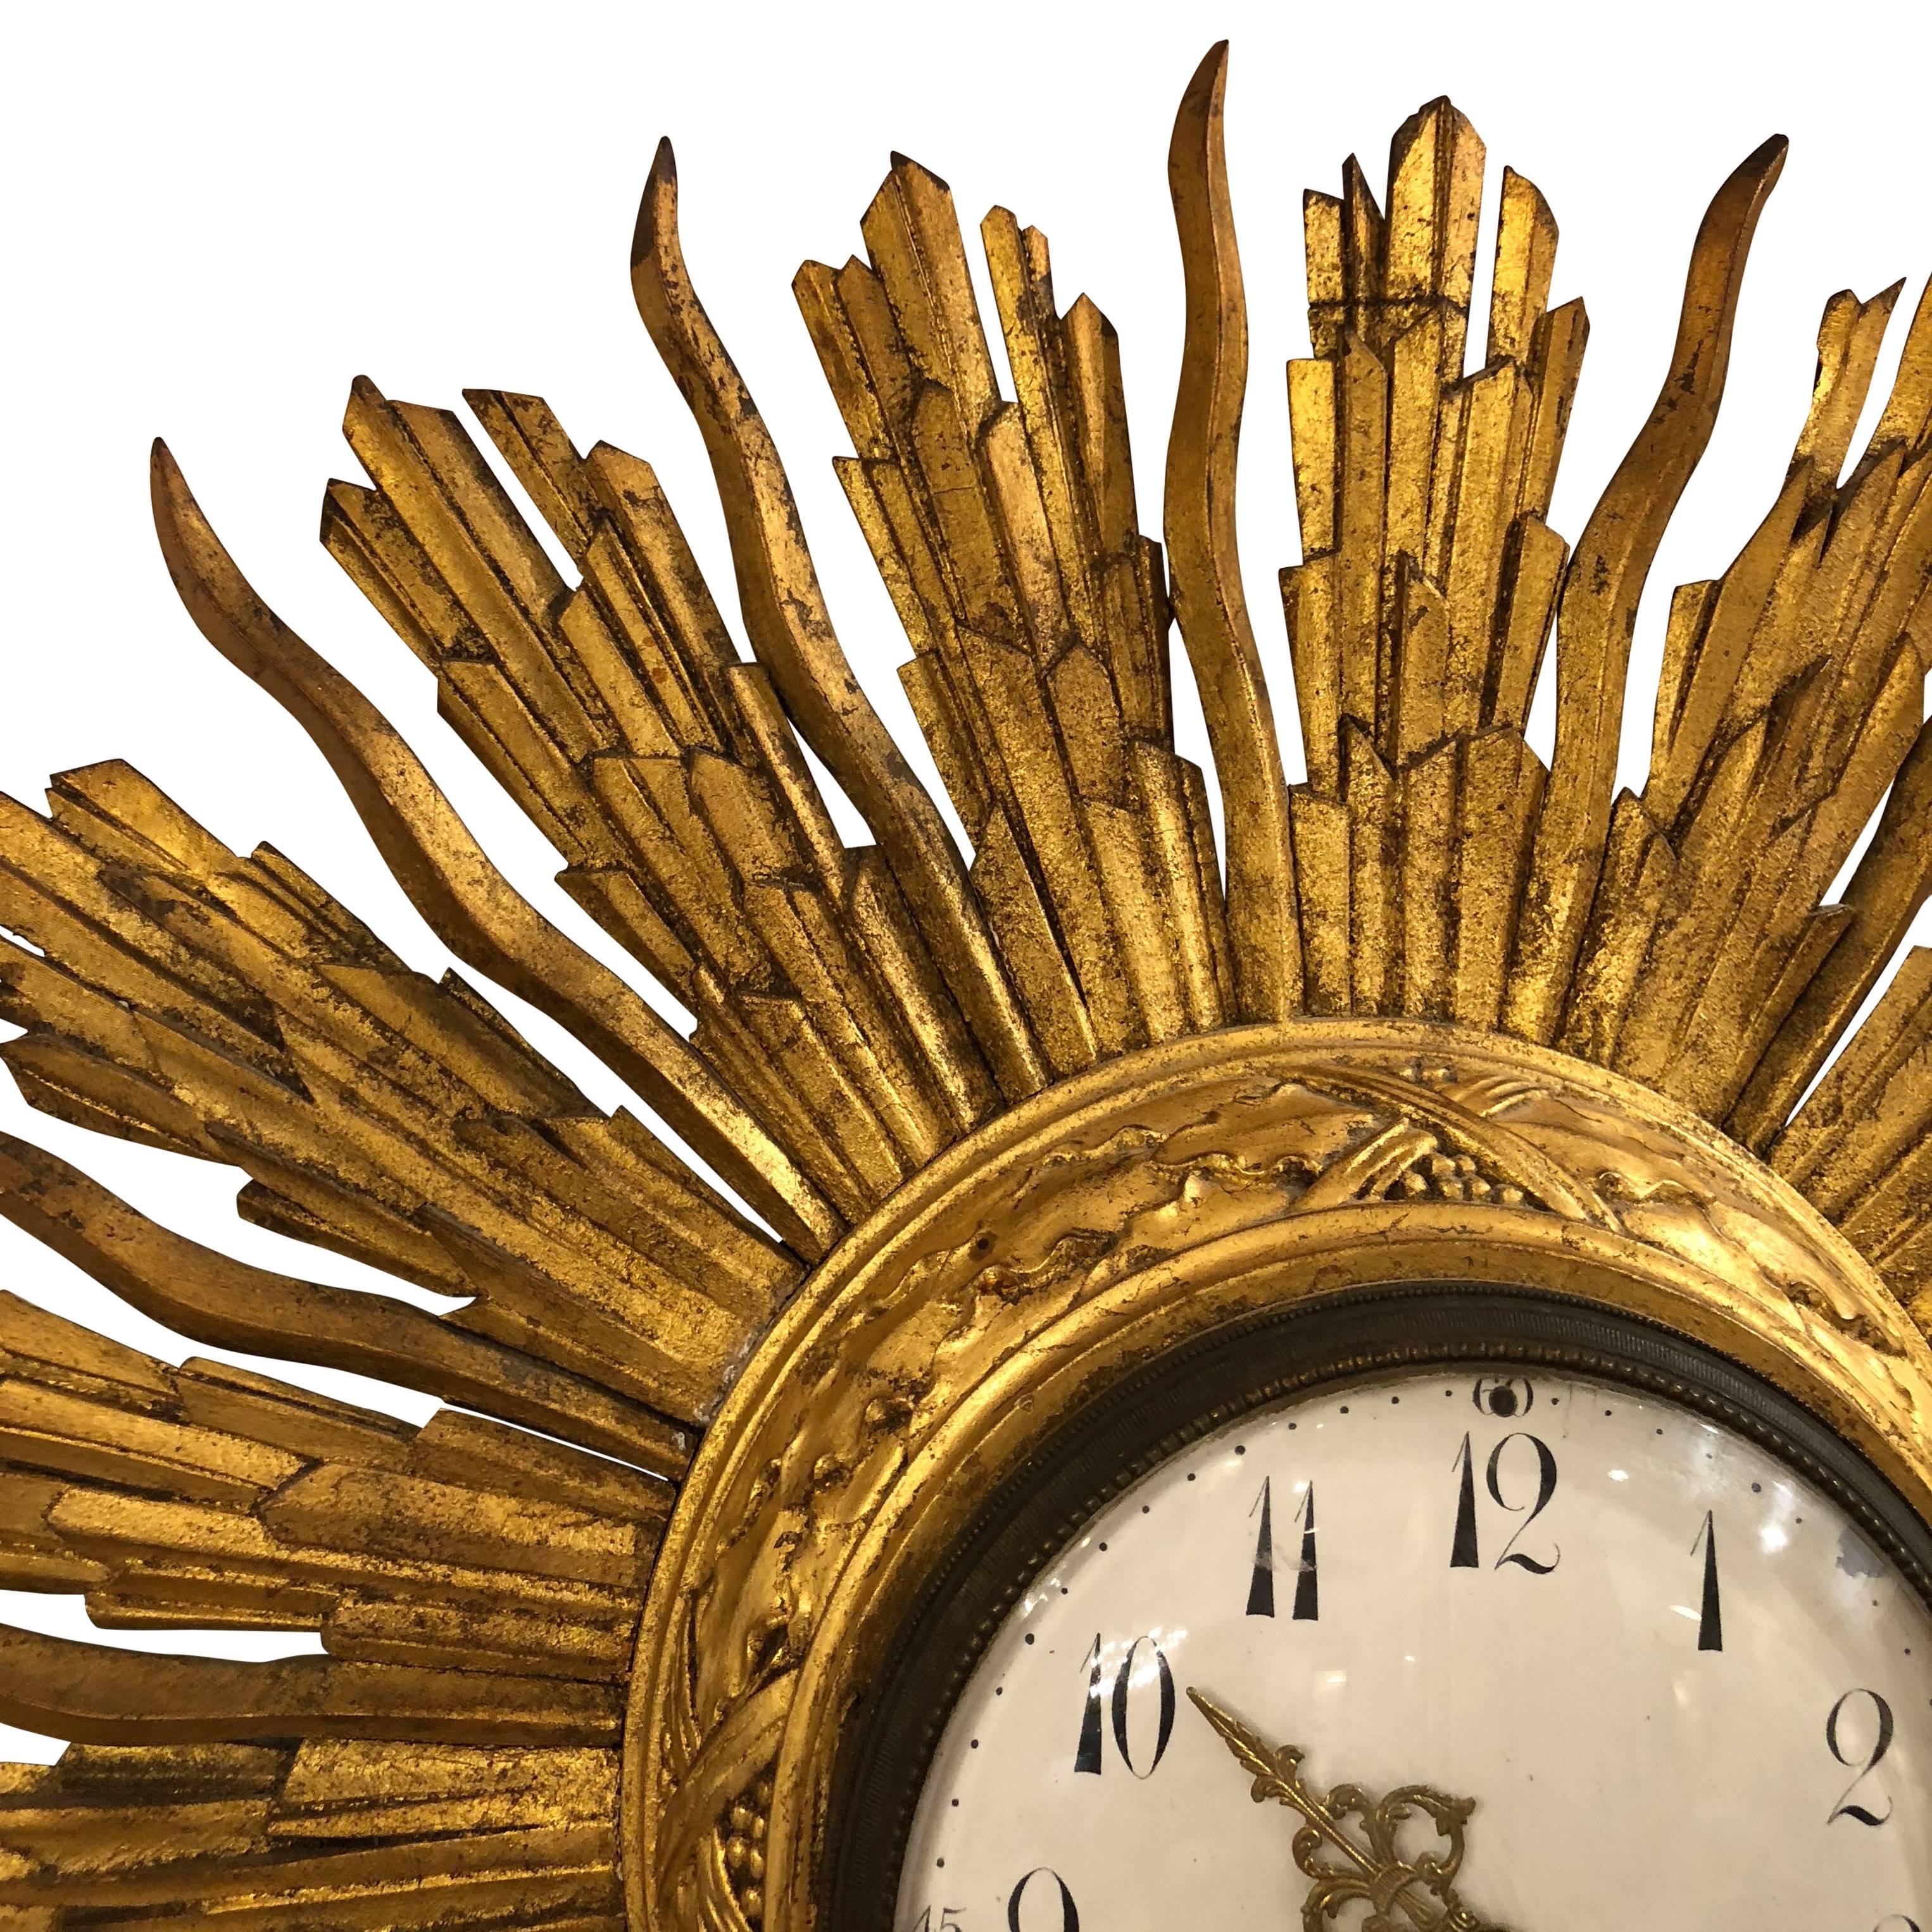 Giltwood starburst barometer clock from France in the 19th century.